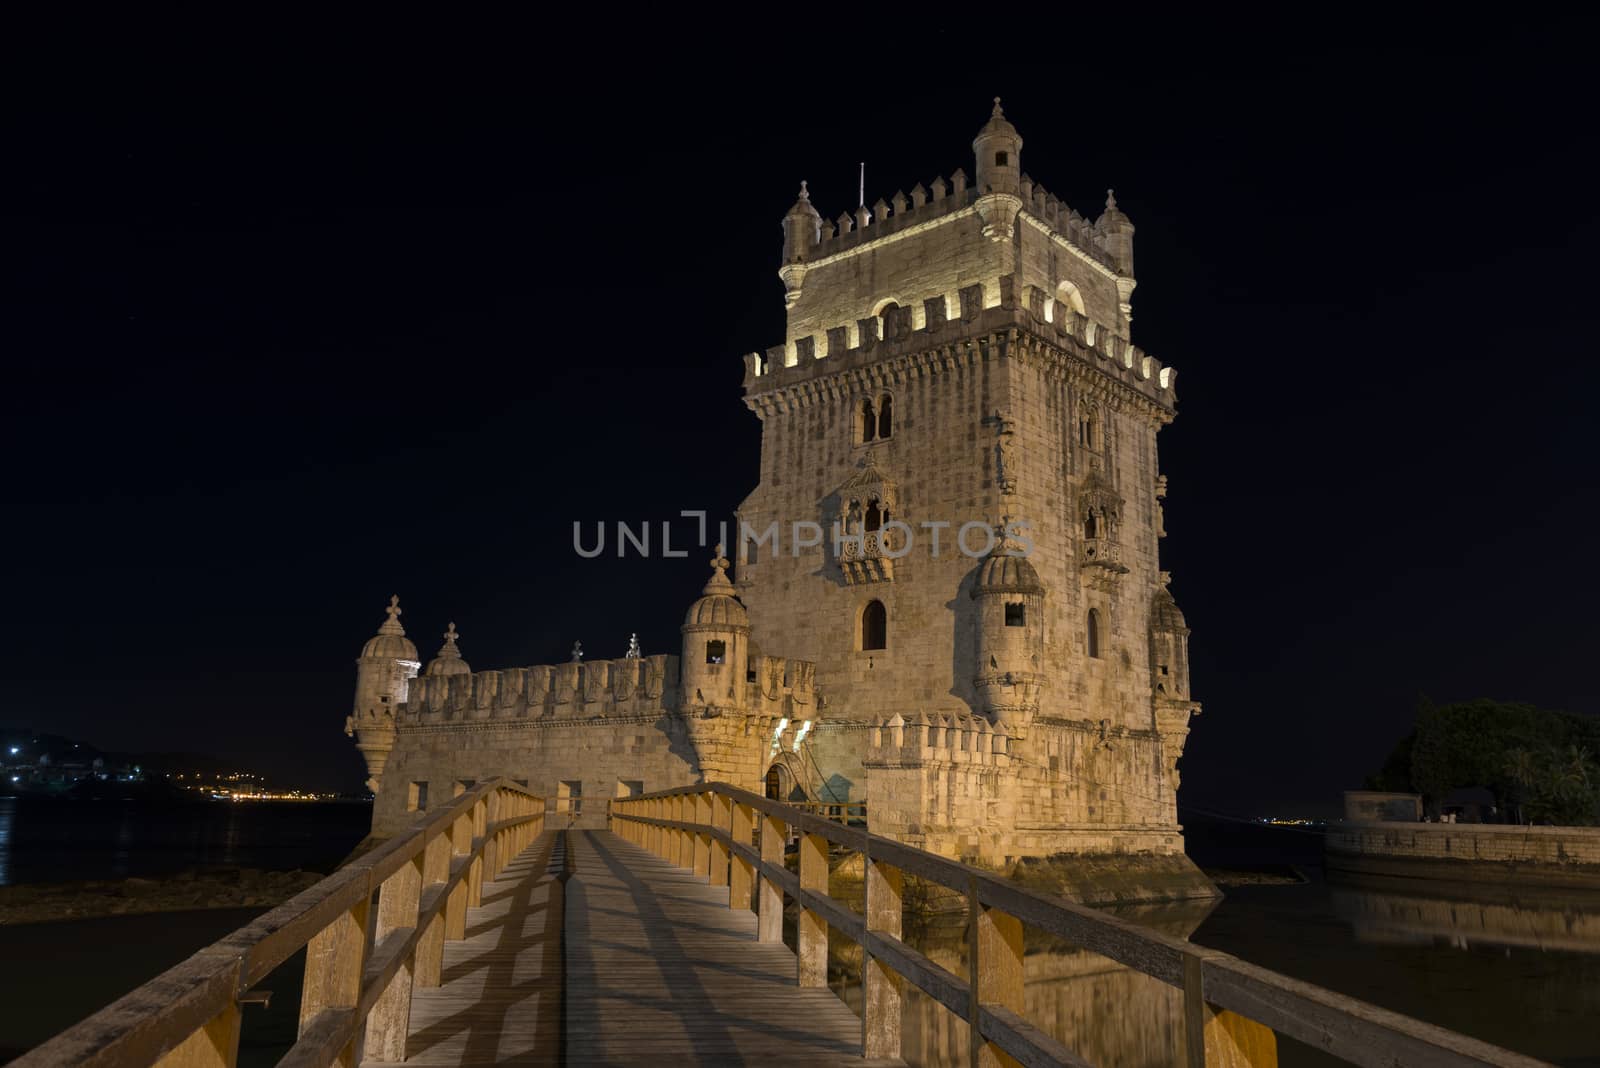 Lisbon, Portugal at Belem Tower on the Tagus River by night